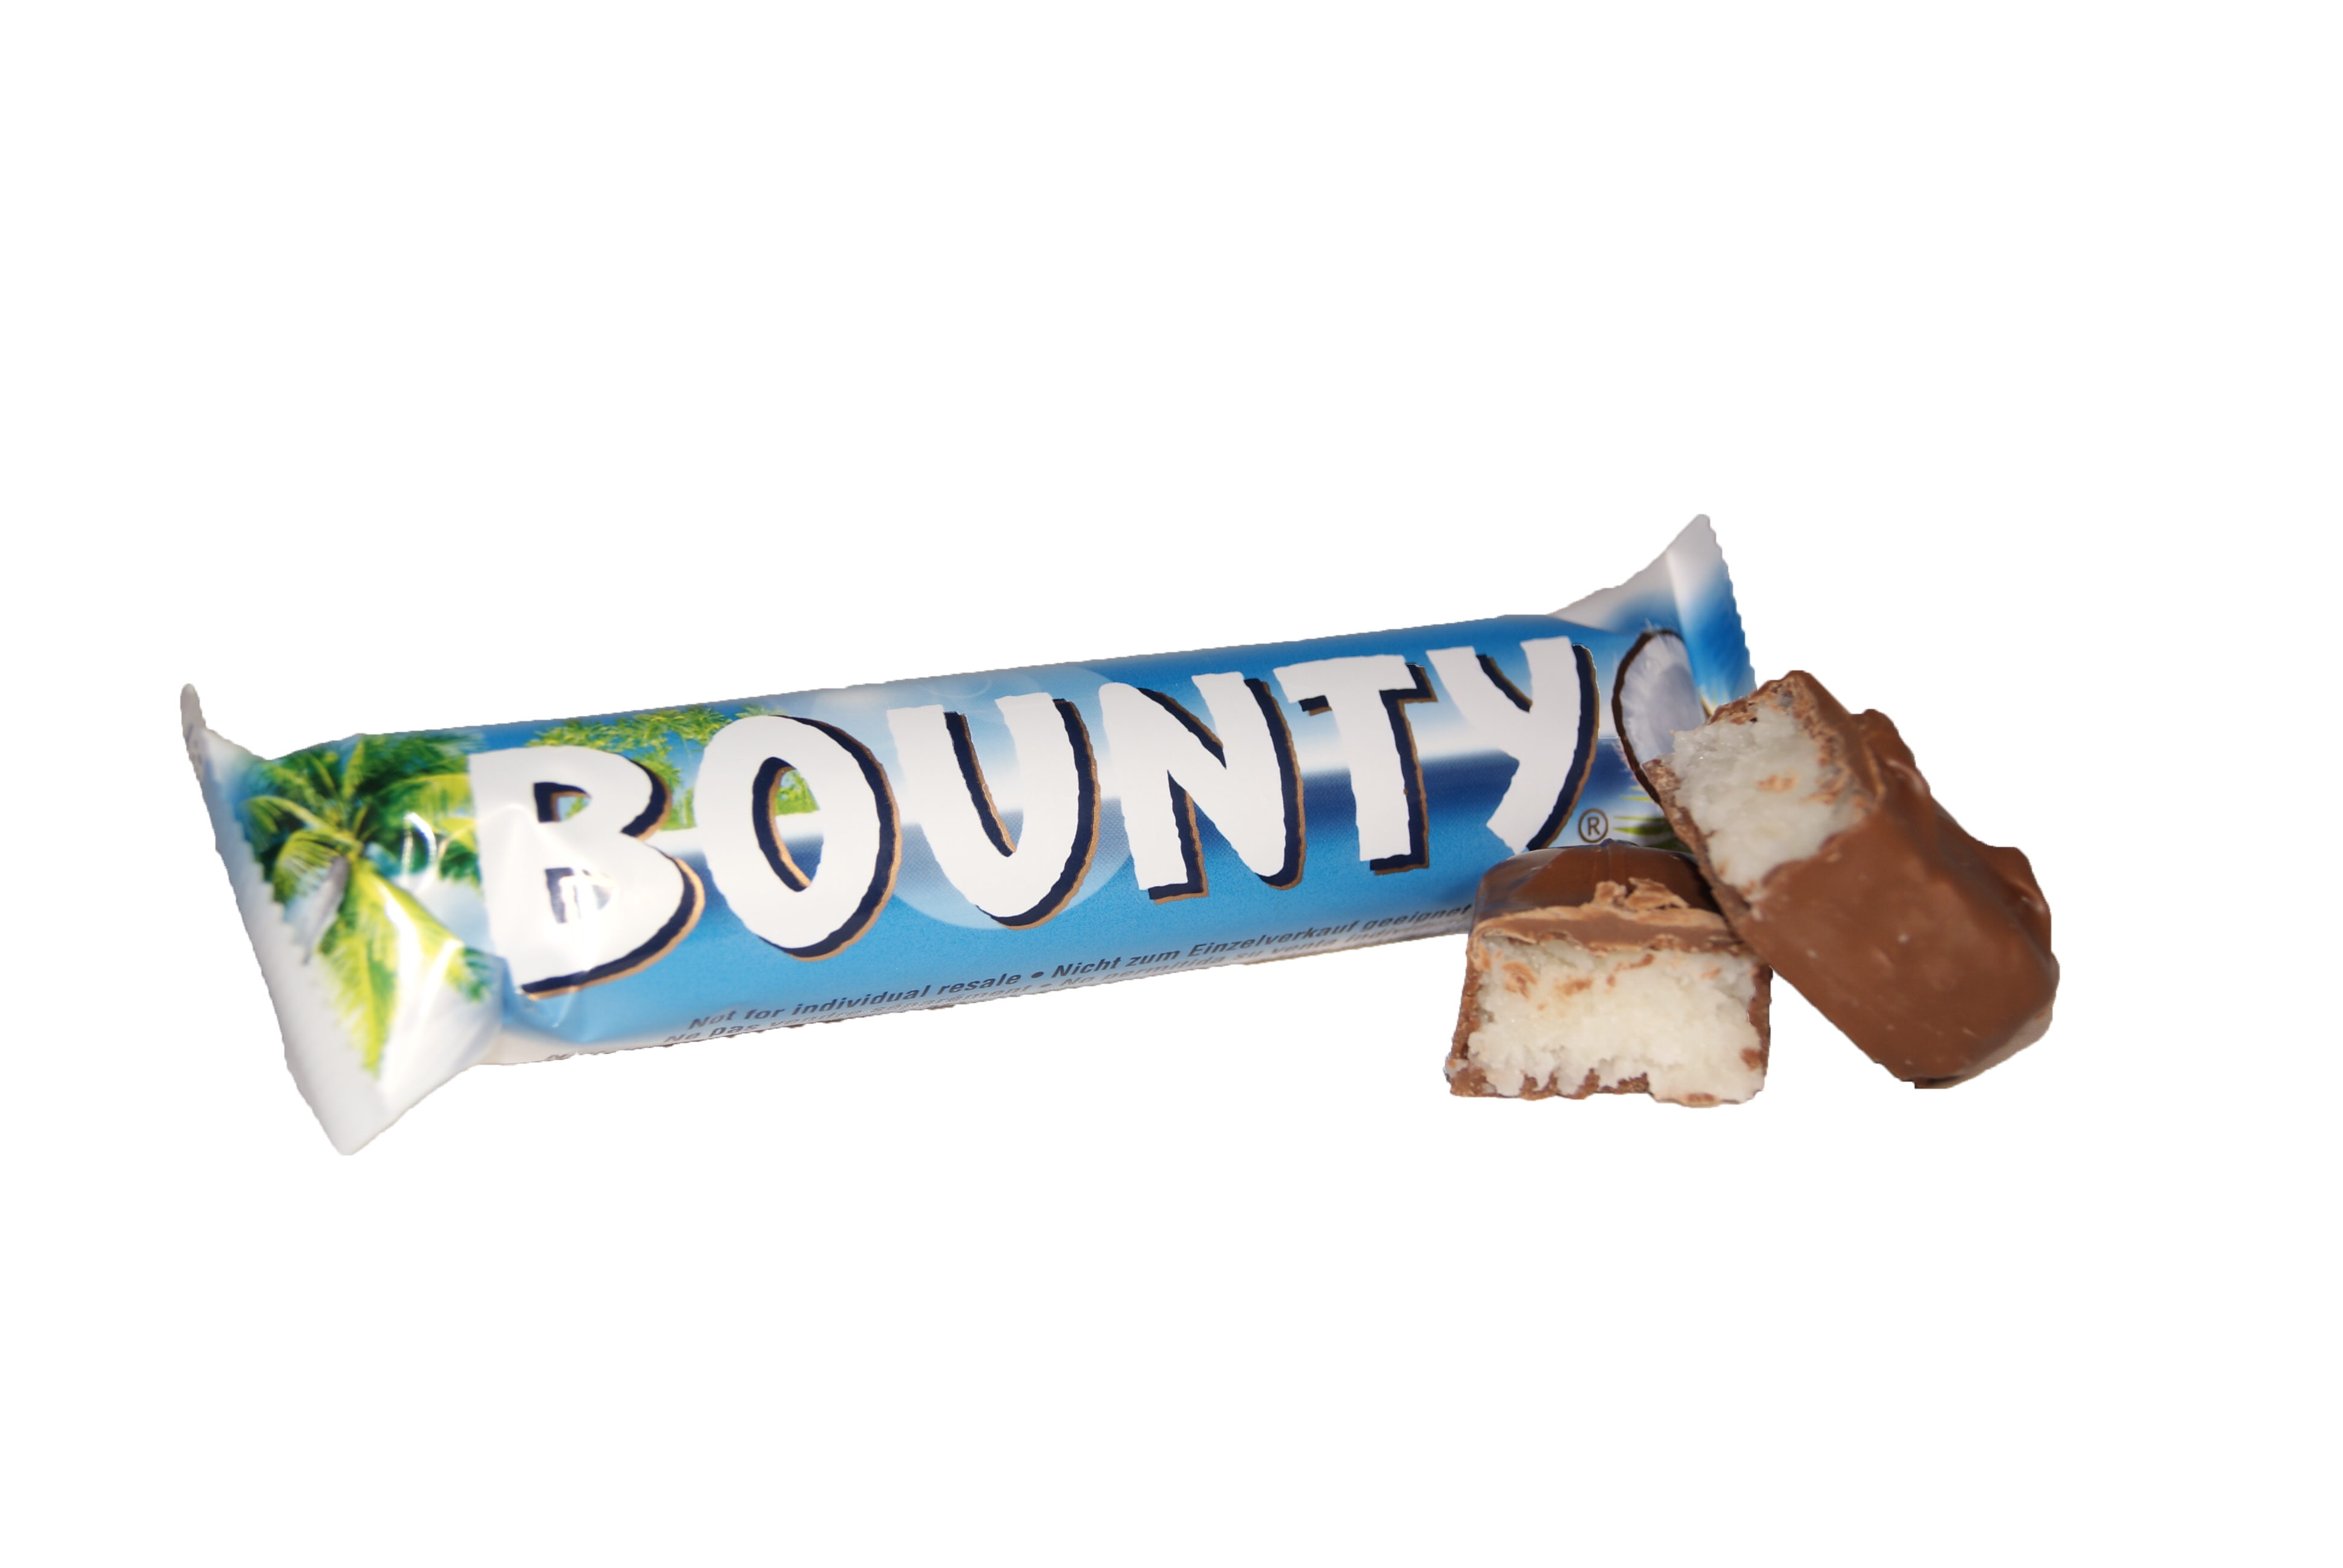 Bounty Wallpapers Images Photos Pictures Backgrounds
